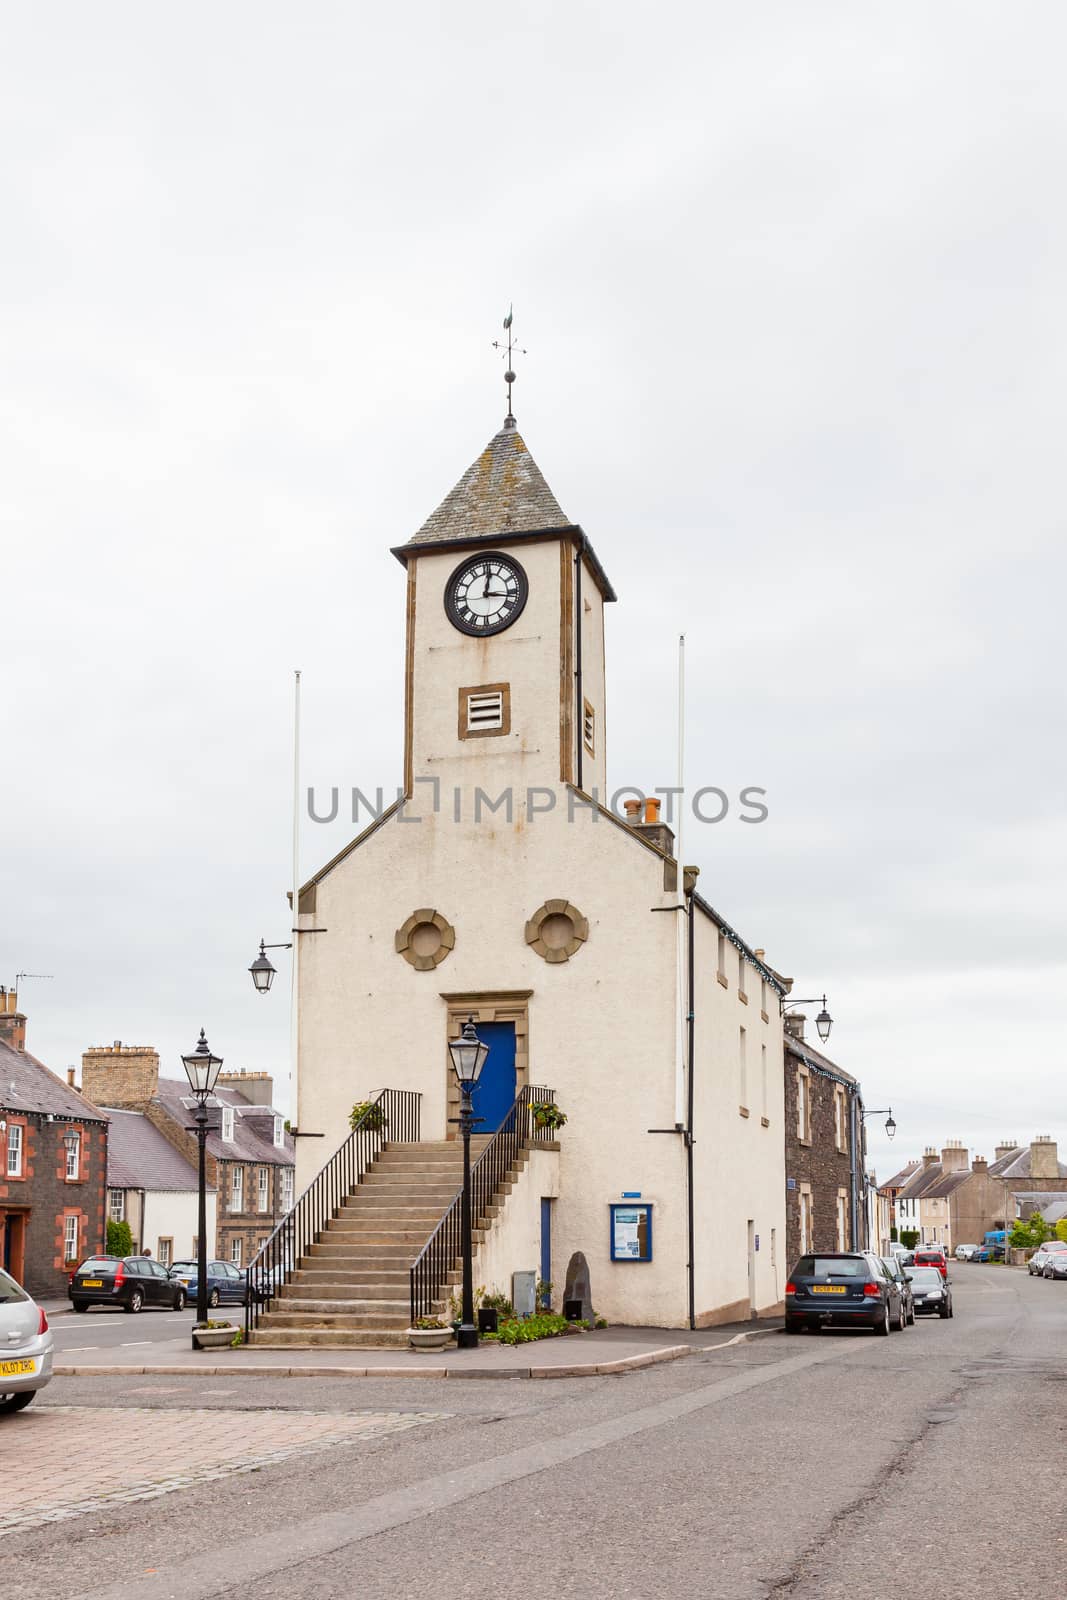 Lauder Town Hall in the Scottish Borders by ATGImages